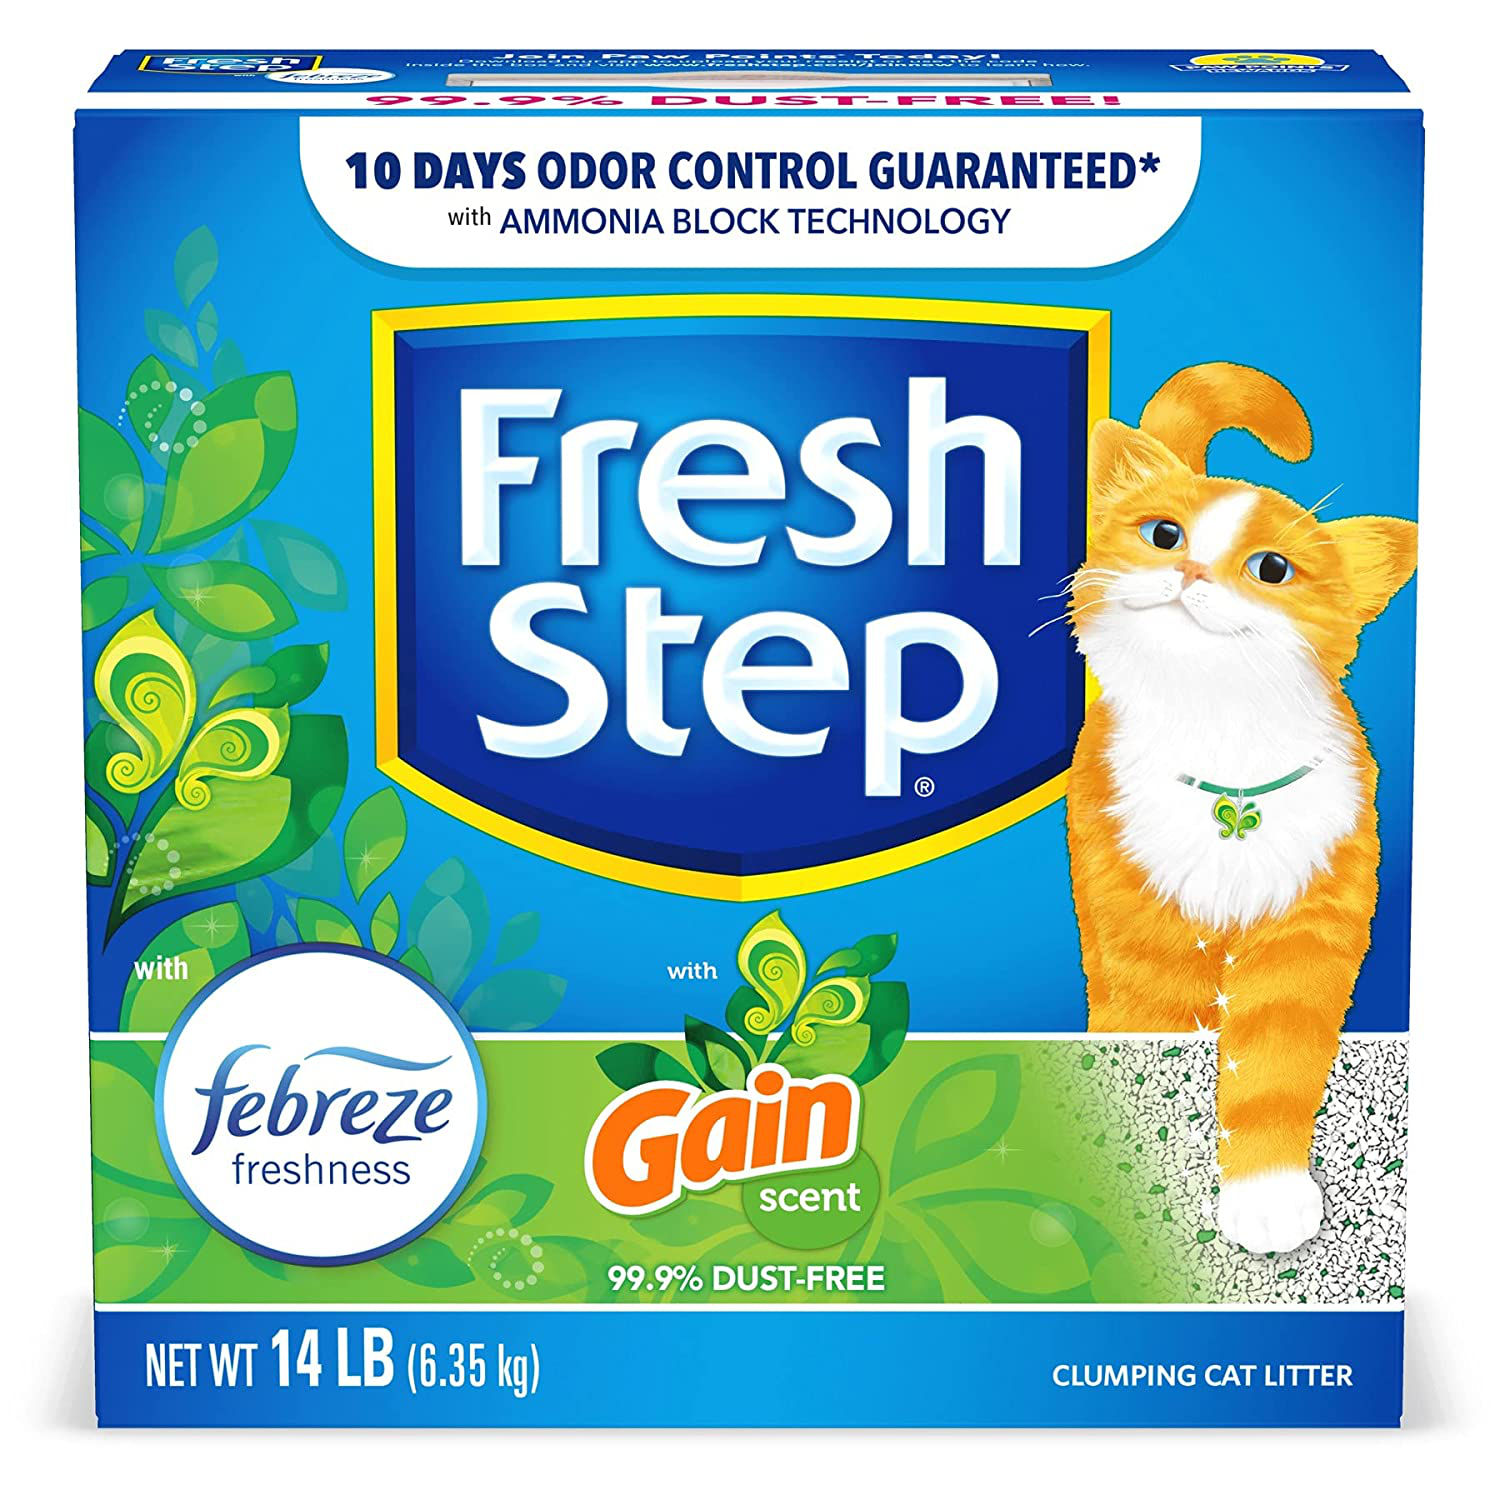 Fresh Step Cat Litter, Clumping Cat Litter with the Power of Febreze with Refreshing Scent 14 Lbs (Package May Vary) Gain, 224 Oz